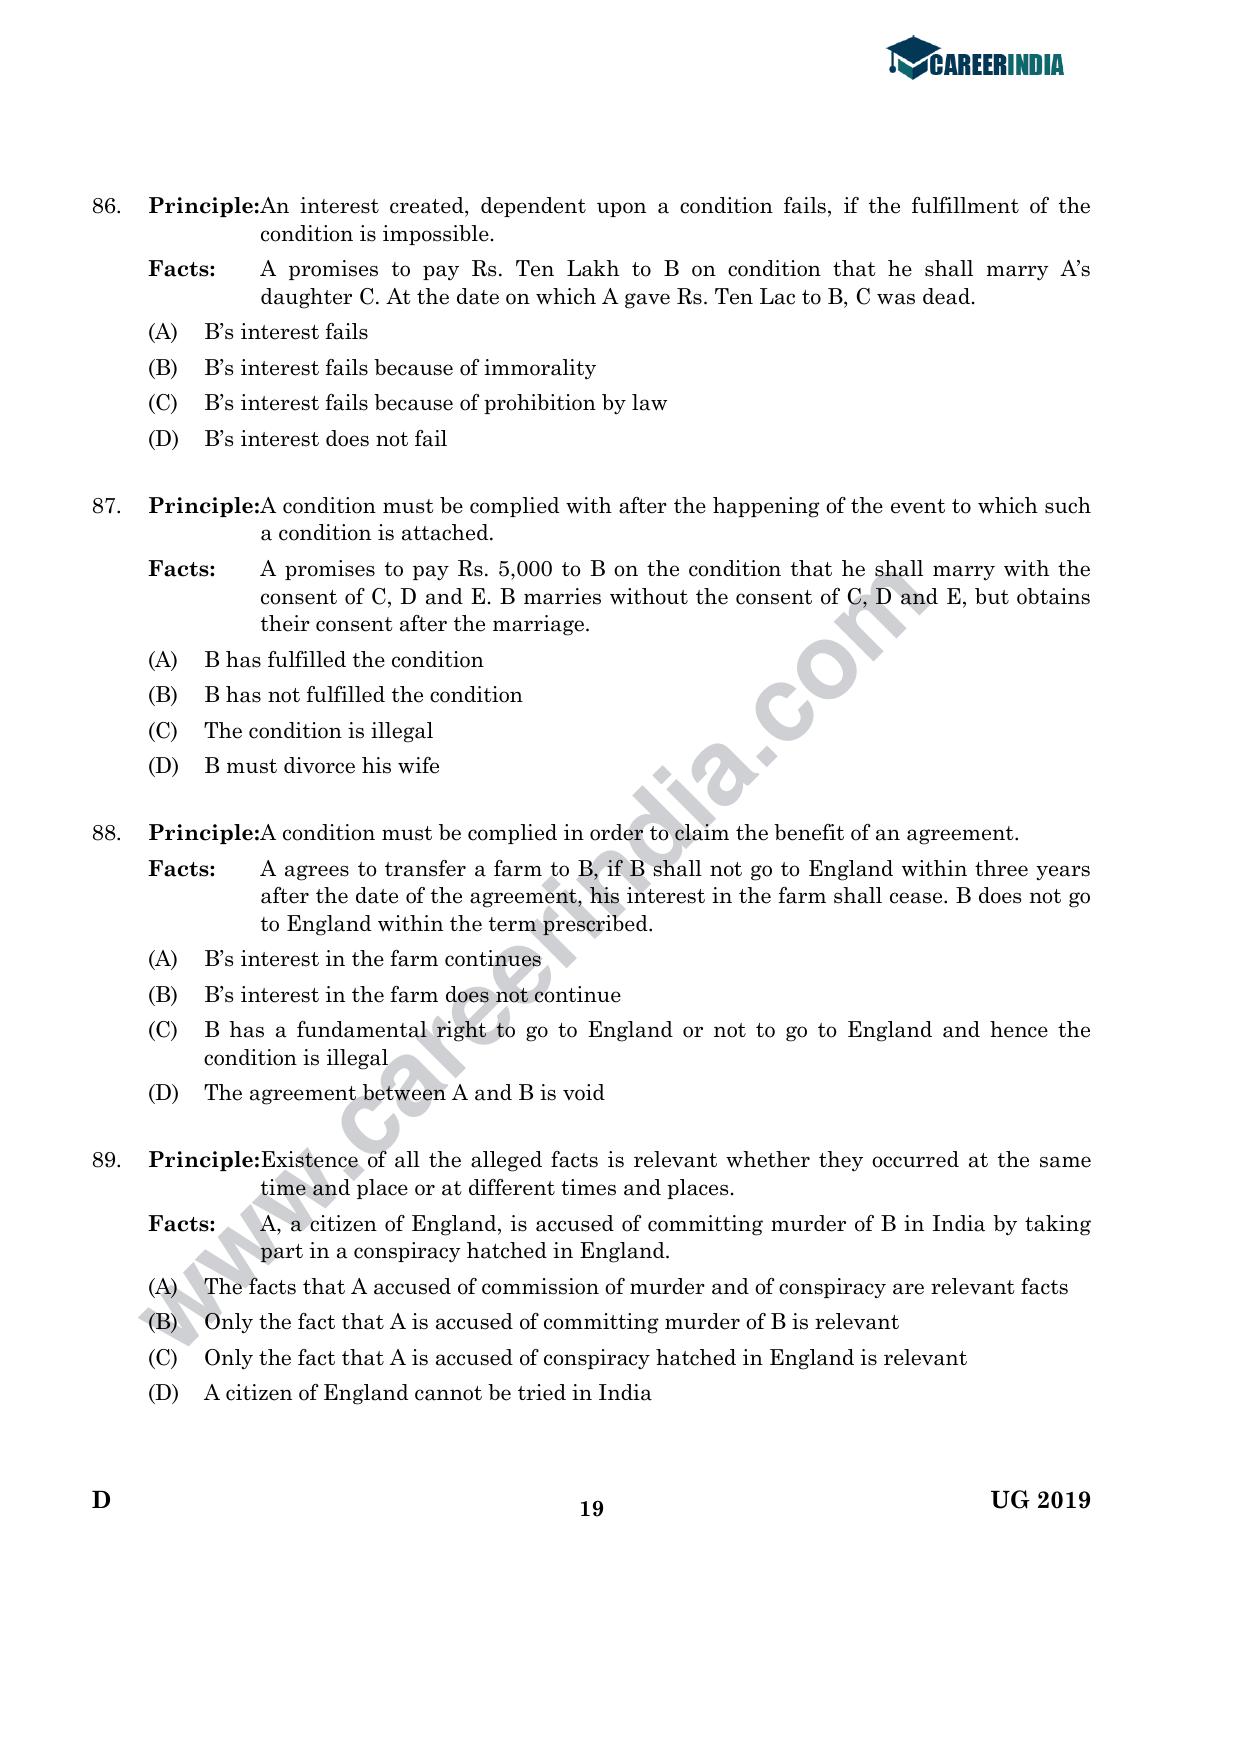 CLAT 2019 UG Logical-Reasoning Question Paper - Page 18